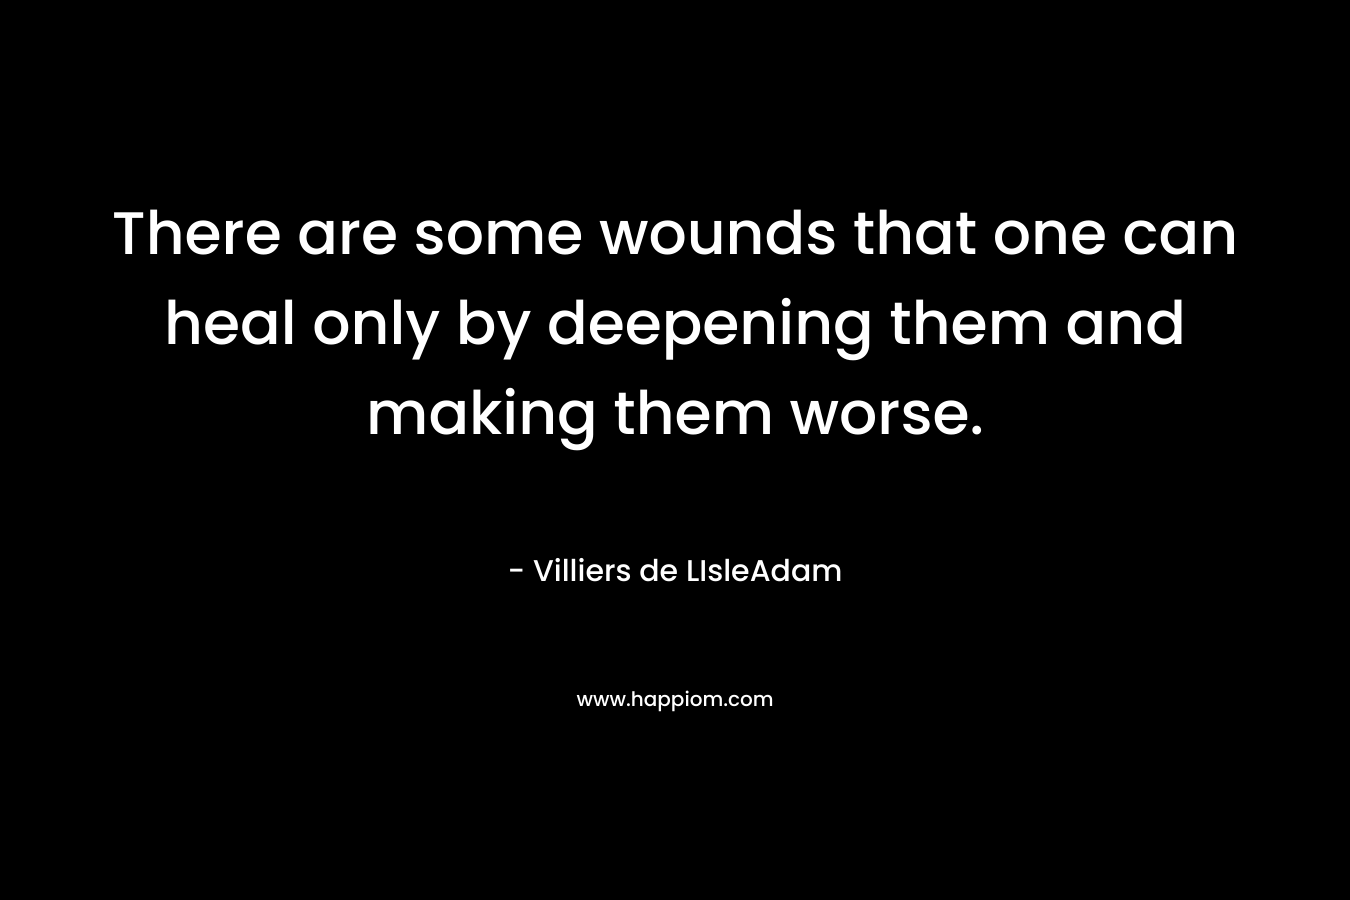 There are some wounds that one can heal only by deepening them and making them worse. – Villiers de LIsleAdam